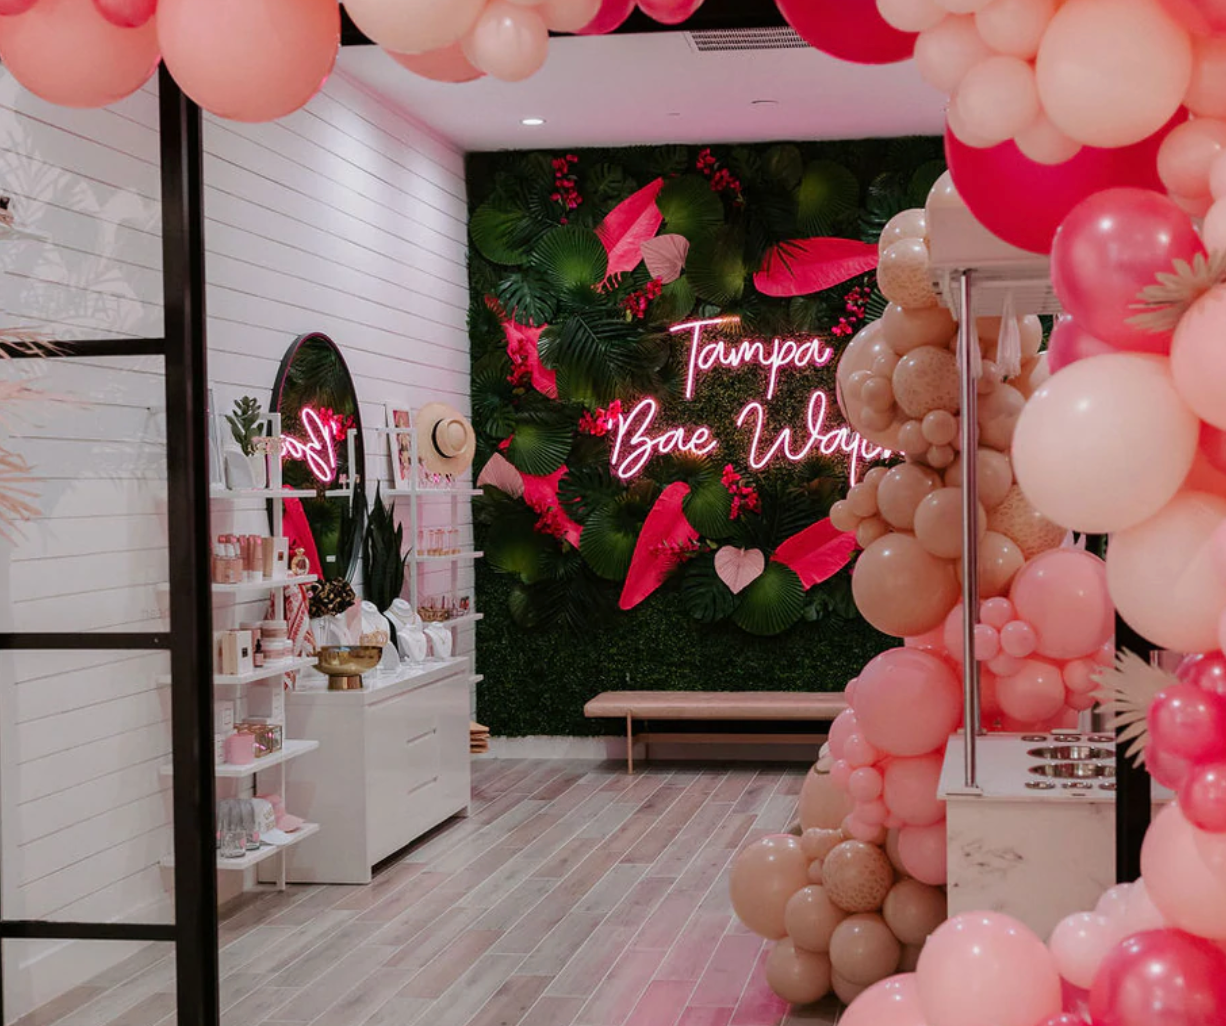 Image of the photo wall located at the Kittenish Tampa retail store.